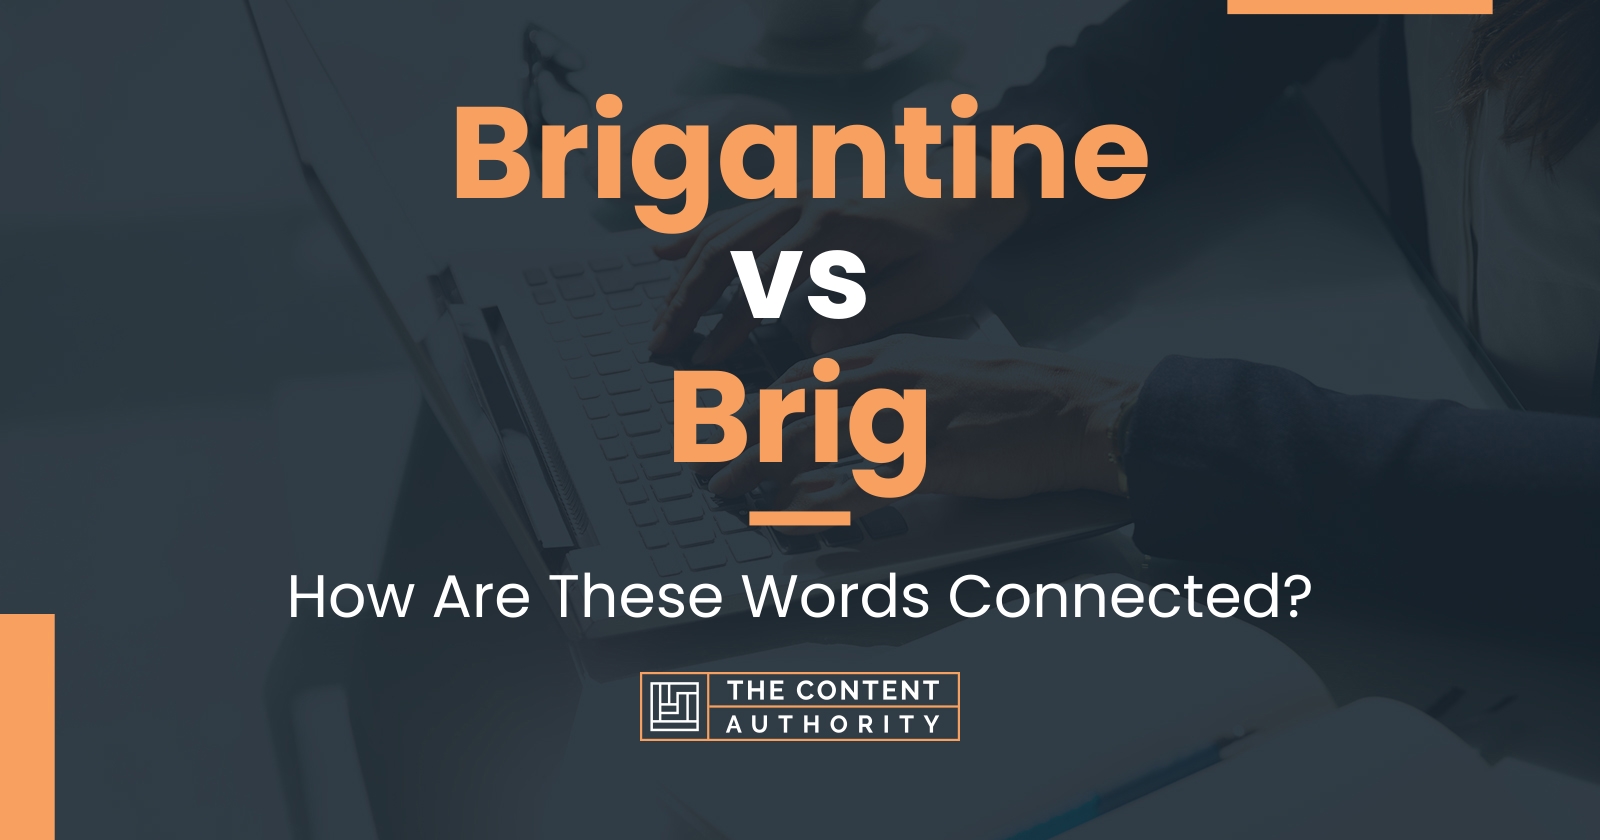 Brigantine vs Brig: How Are These Words Connected?